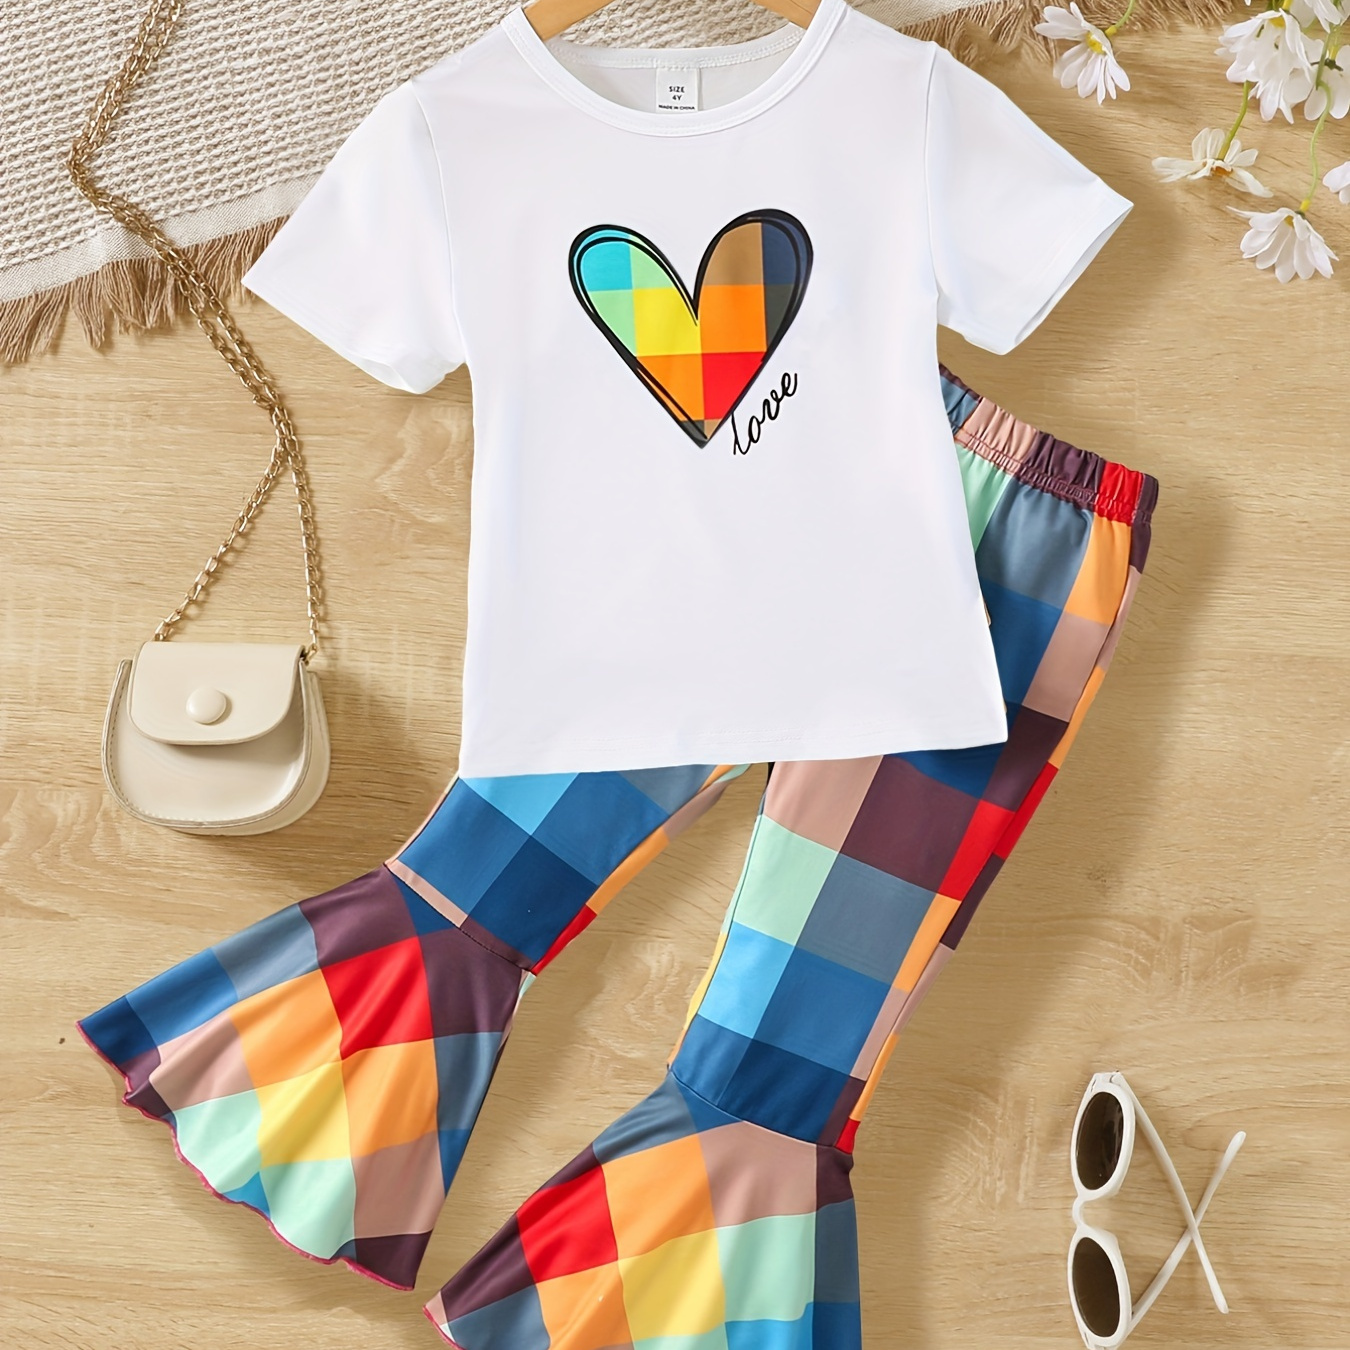 

2pcs Toddler Girls Heart Graphic T-shirt Round Neck Tee Tops & Colorful Plaid Flare Leg Pants Set Kids Summer Clothes